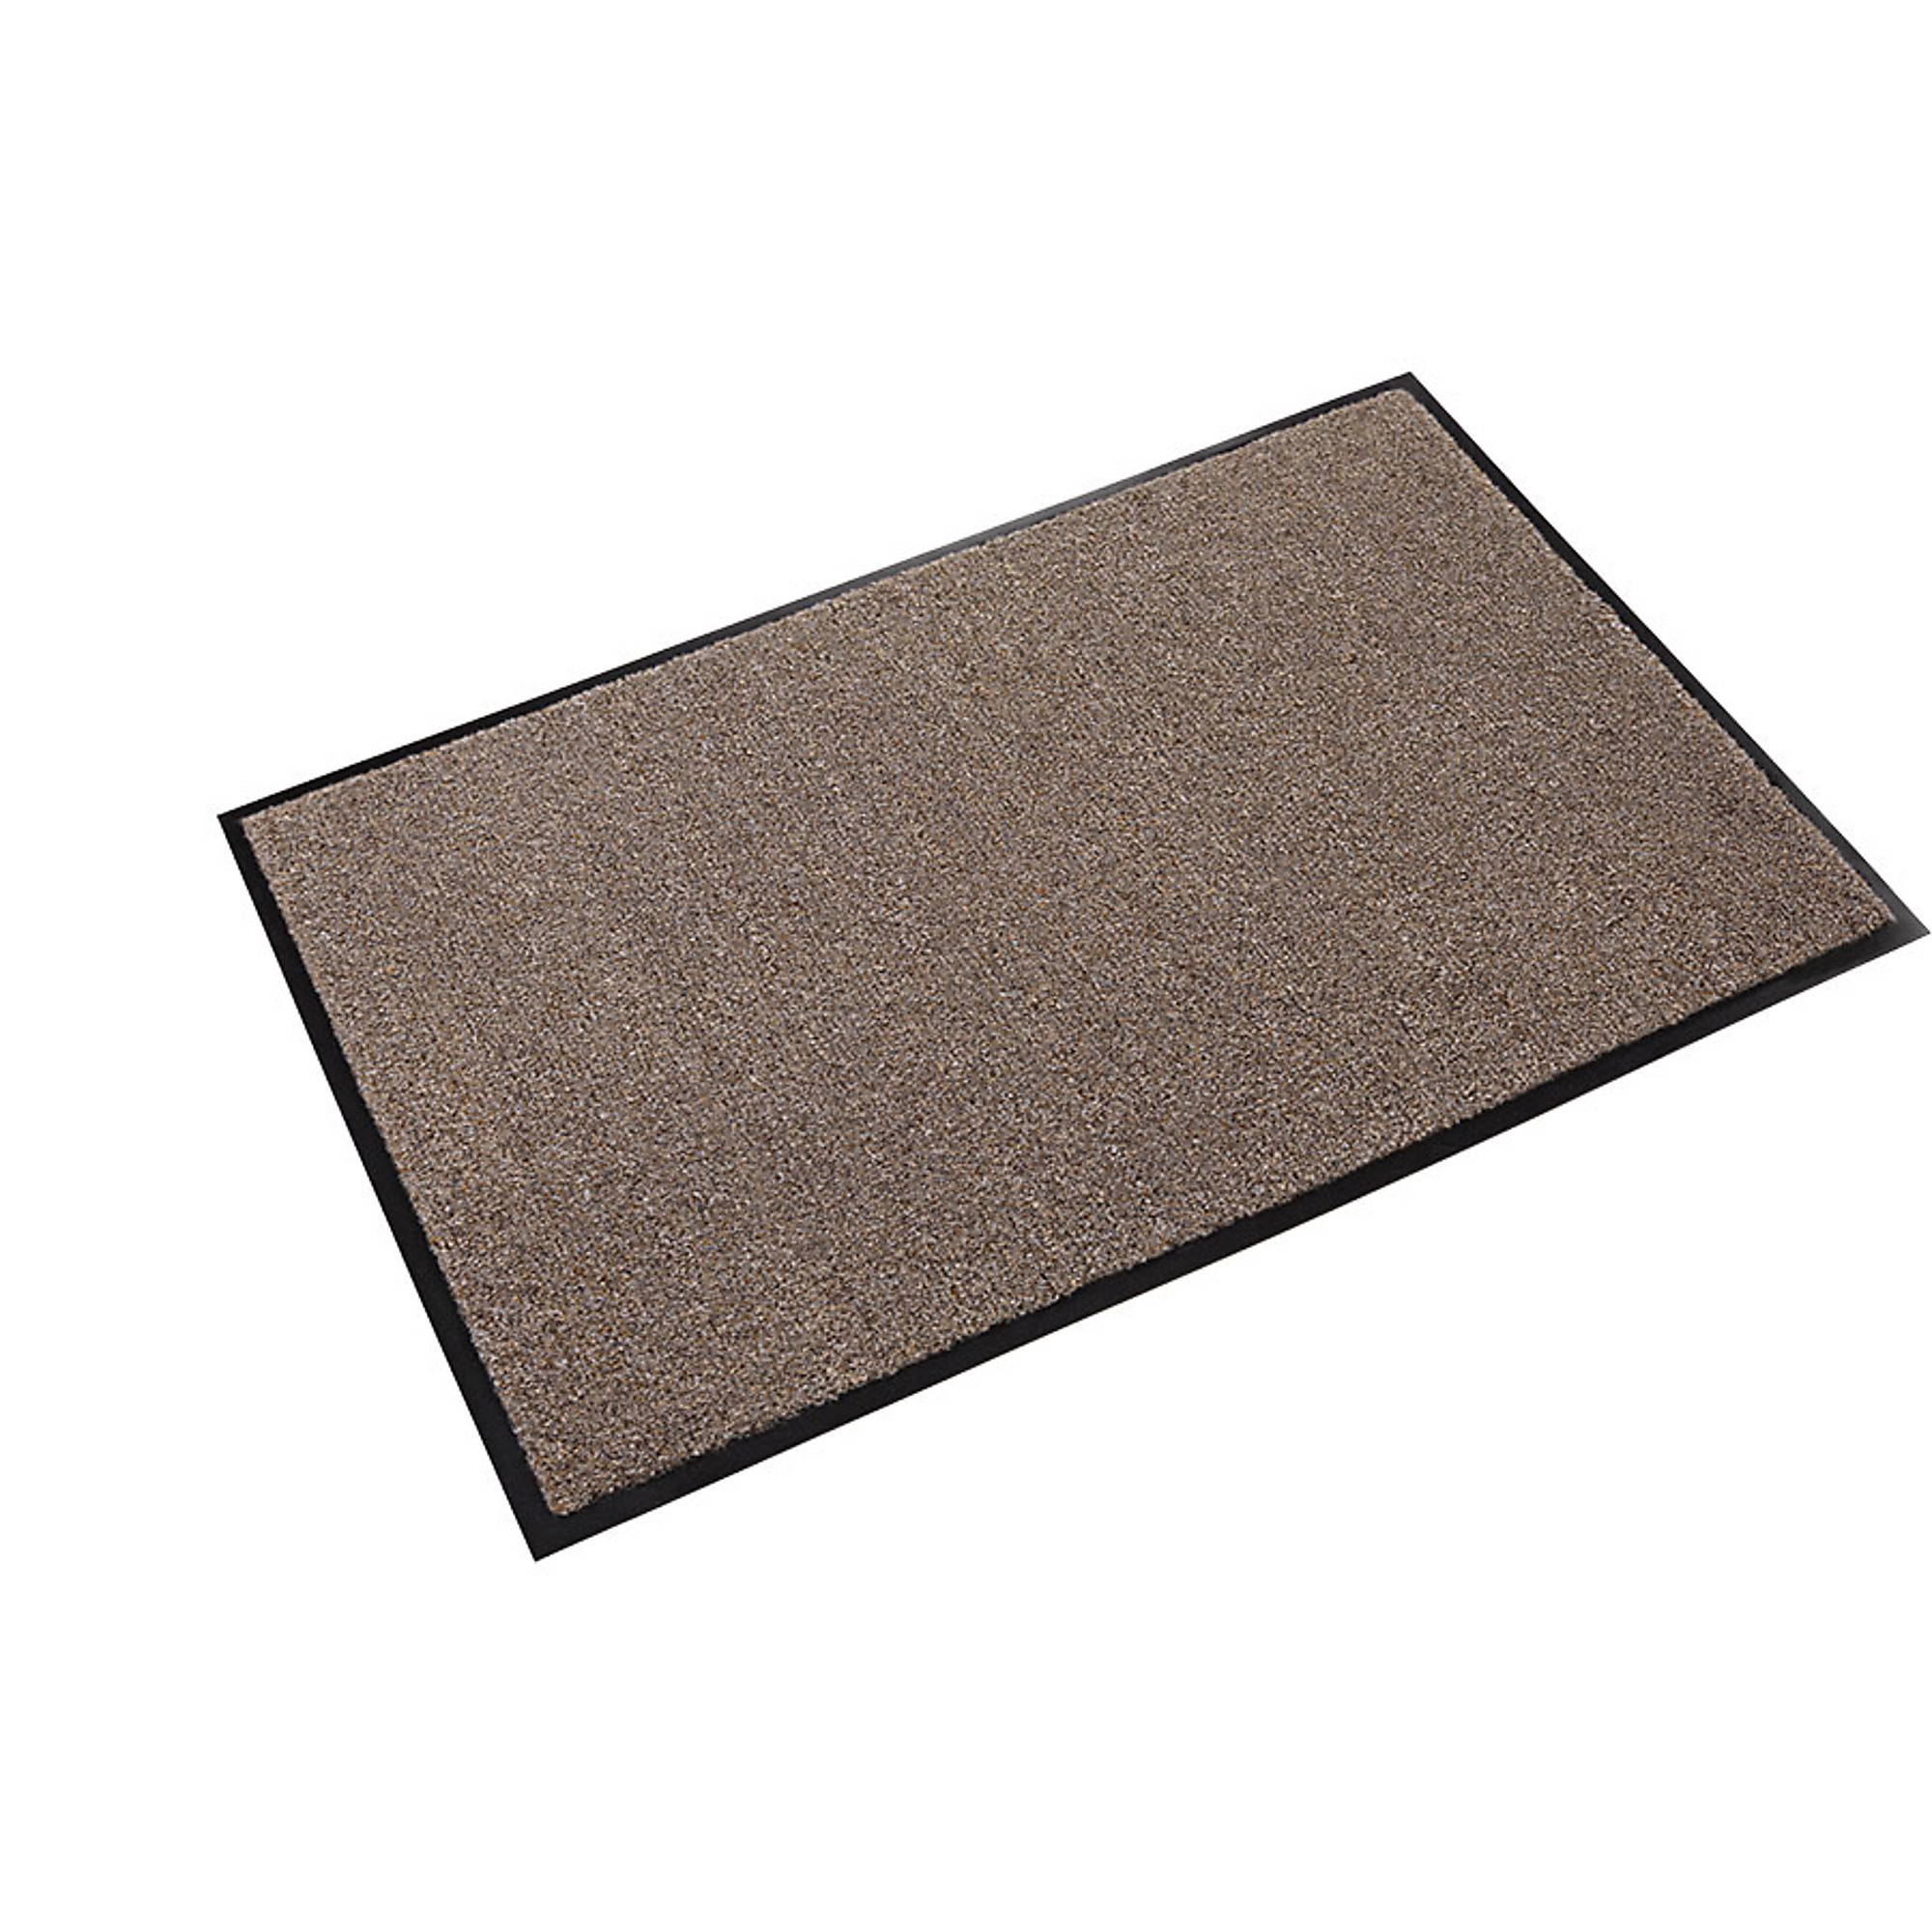 Crown Matting Technologies, Rely-On Olefin 3ft.x60ft. Pebble Brown, Width 36 in, Length 720 in, Thickness 3/8 in, Model GSR0036PB